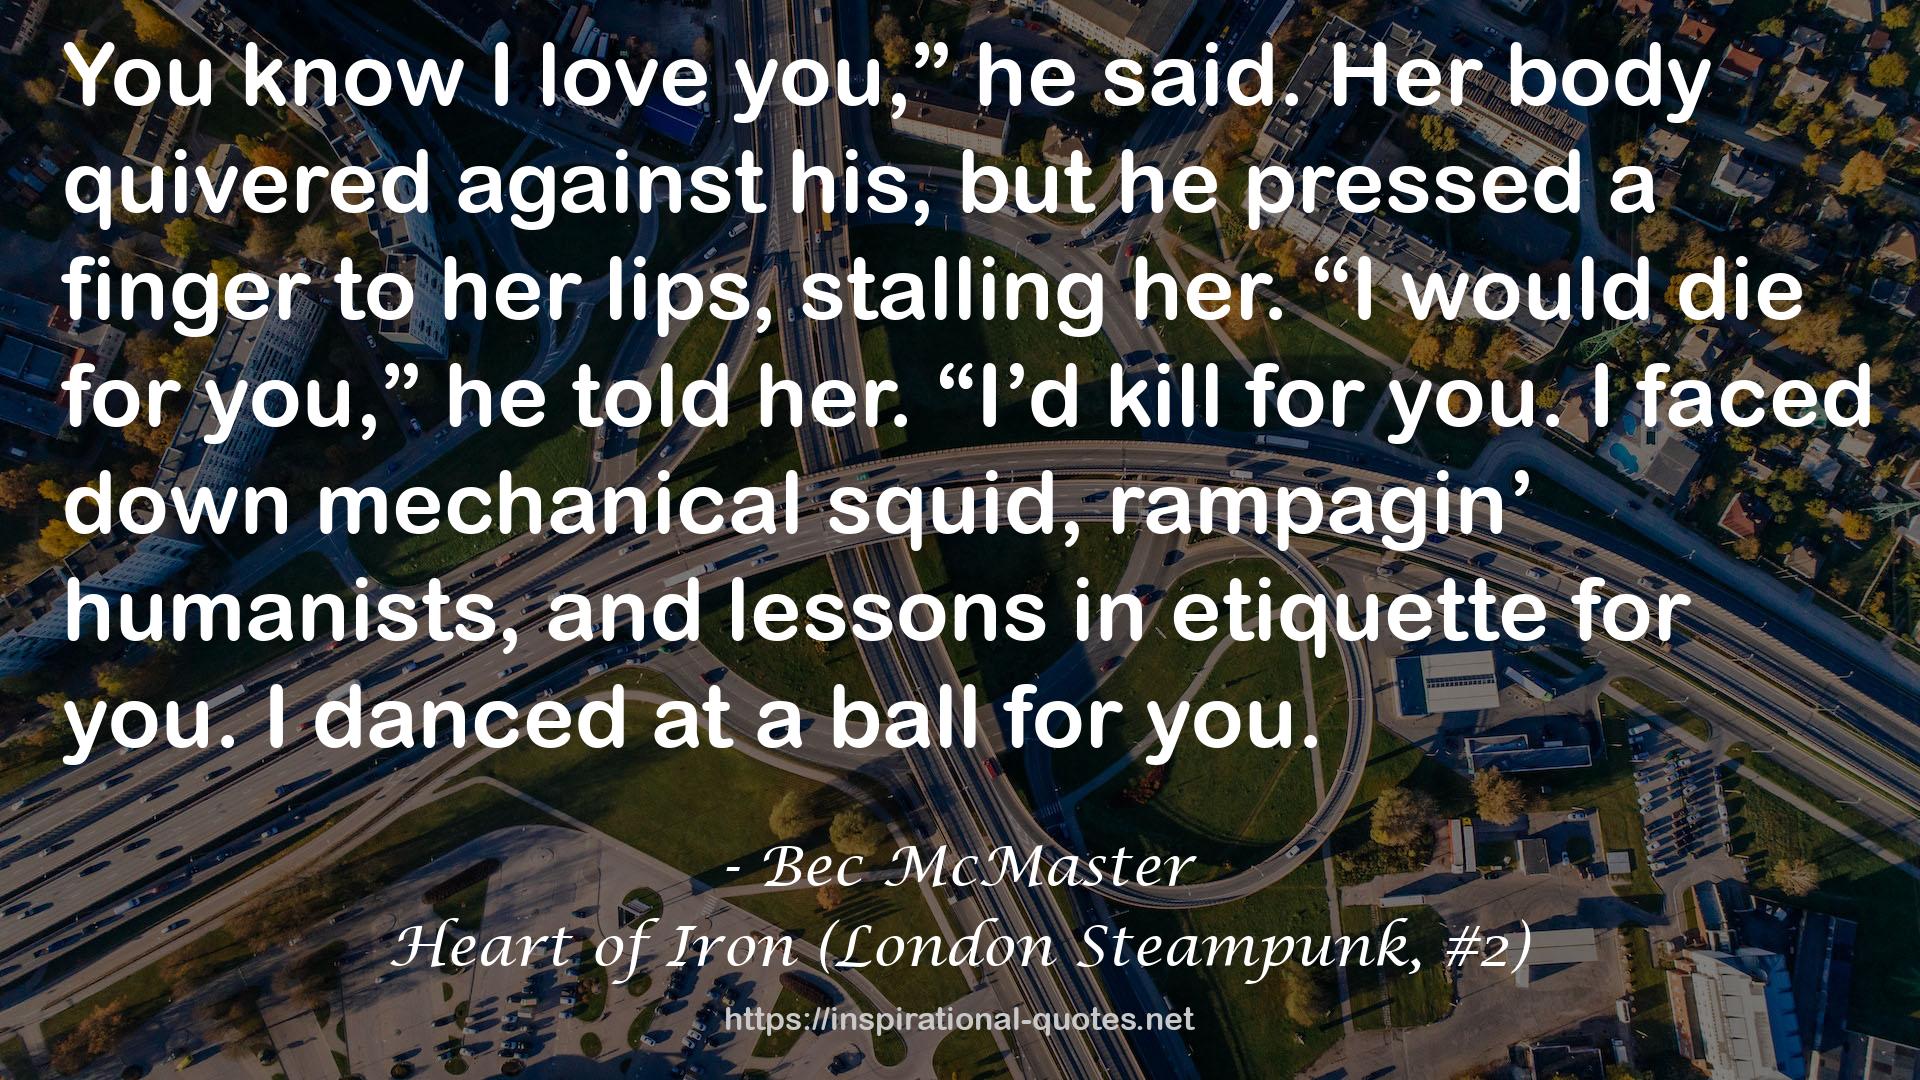 Heart of Iron (London Steampunk, #2) QUOTES